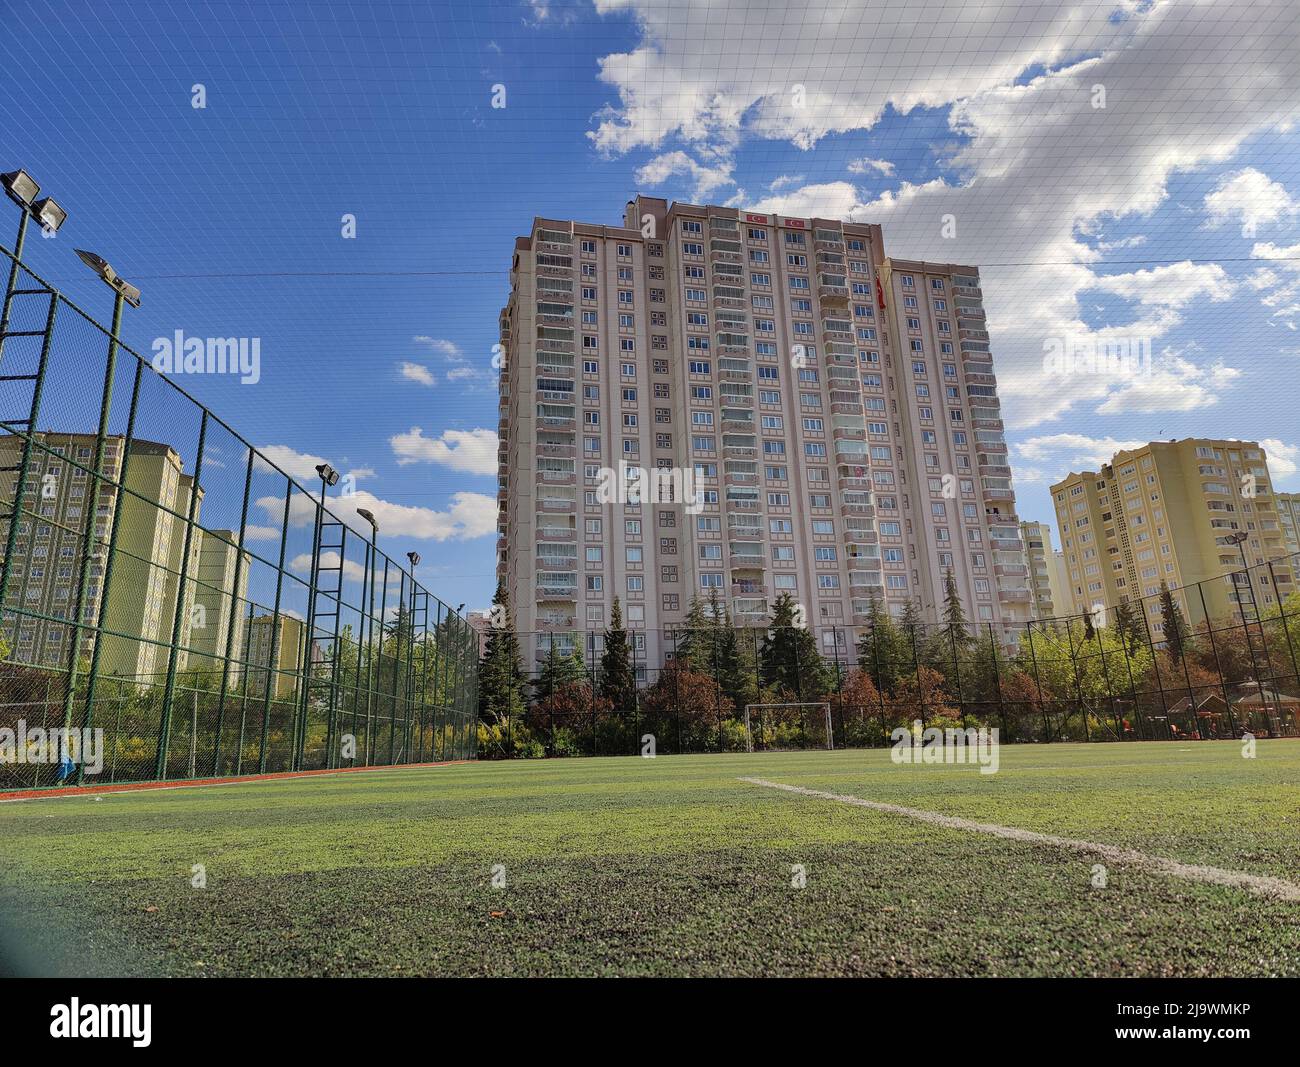 tall building behind football field fence Stock Photo